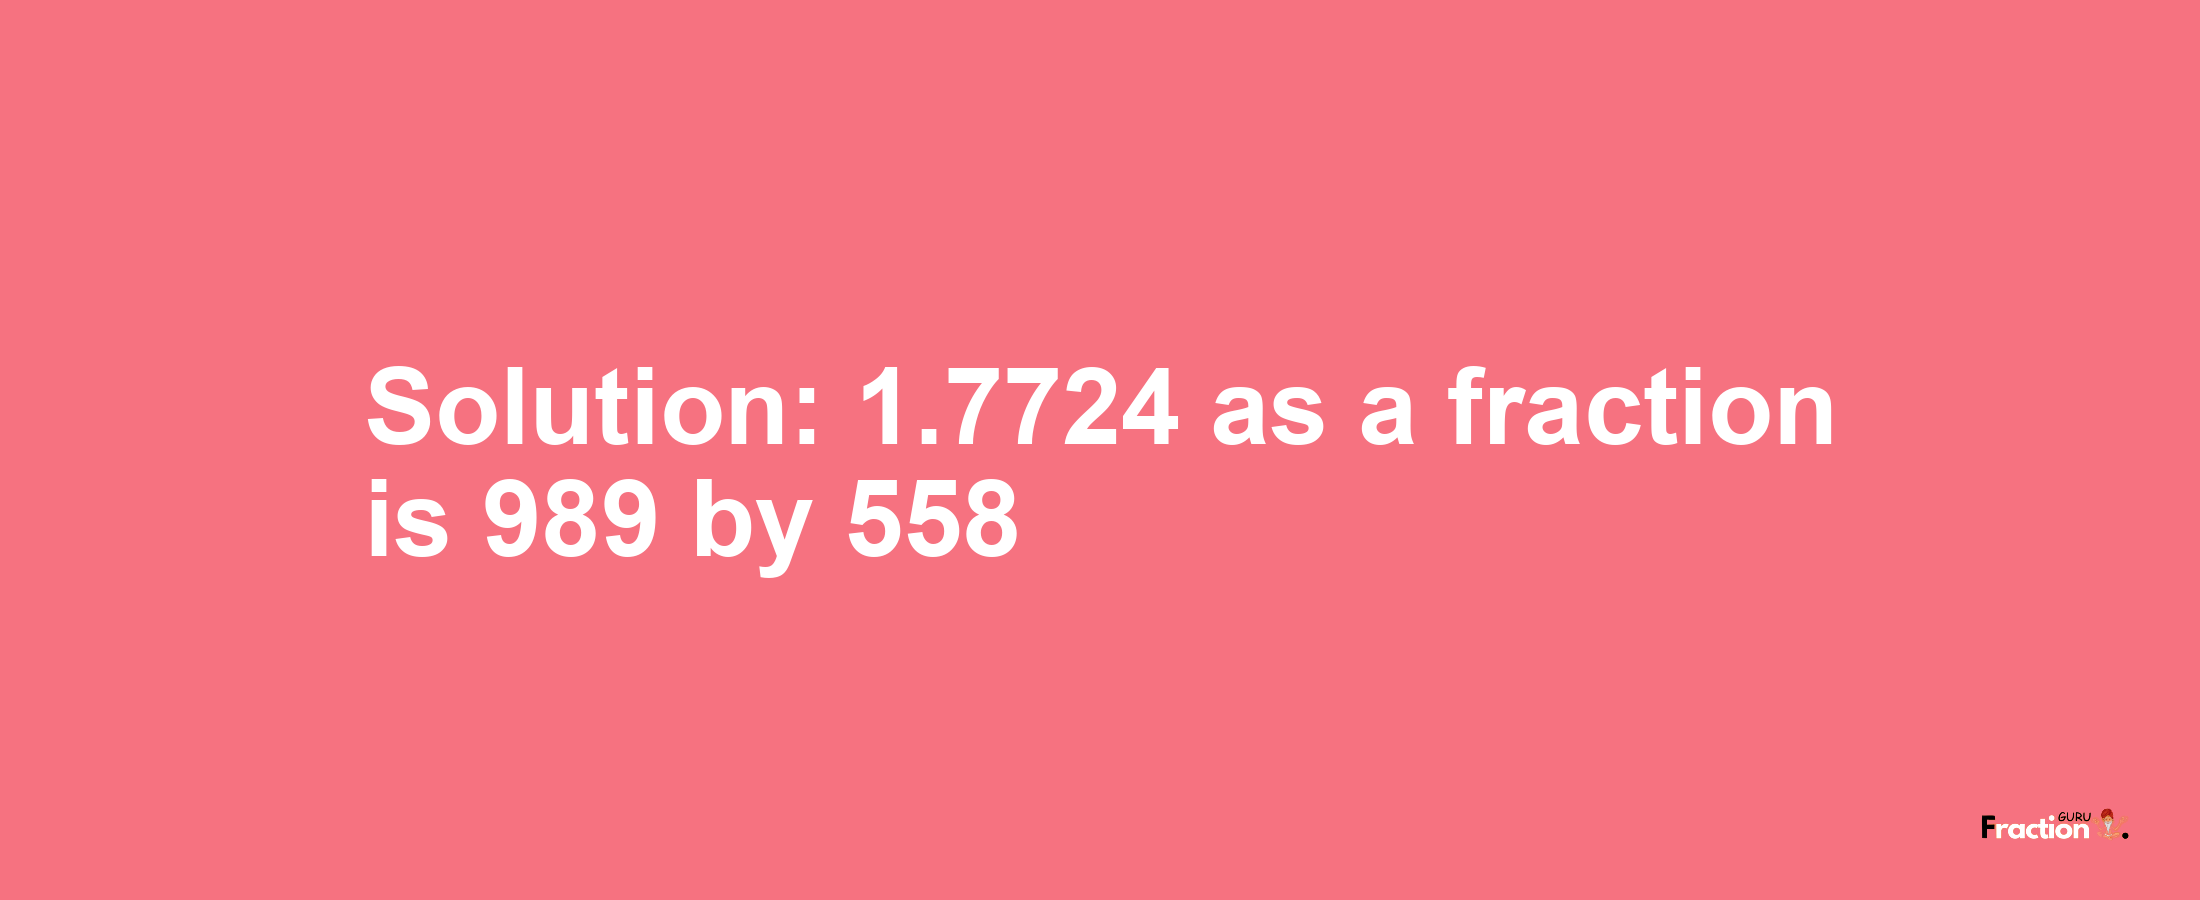 Solution:1.7724 as a fraction is 989/558